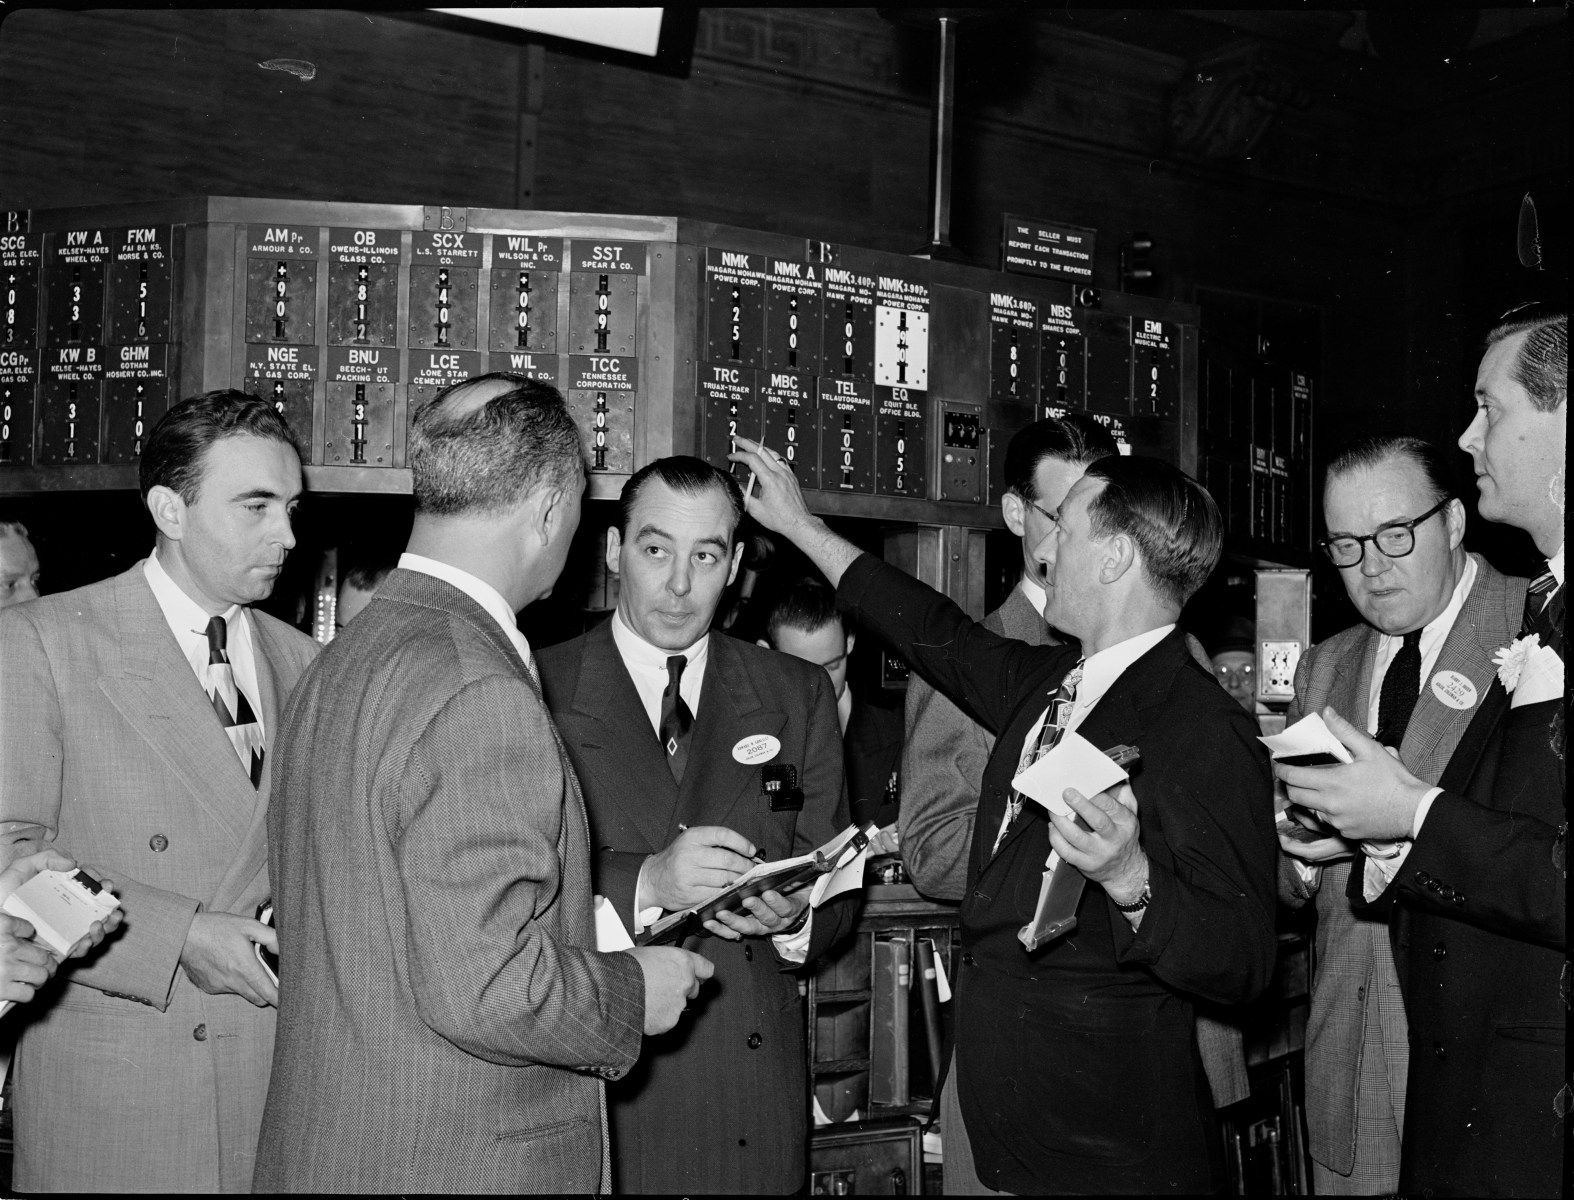 Here are some brokers at a trading post. These giant trading posts were all over the gigantic trading floor of the New York Stock Exchange. The guy on the right is actually physically rolling the numbers that would display the sale price of a particular stock. The guy on the left with the big notebook was a specialist. His job was to take down a stock trade in that giant notebook. It was a very labor-intensive world and there were a lot of complicated steps to get through.